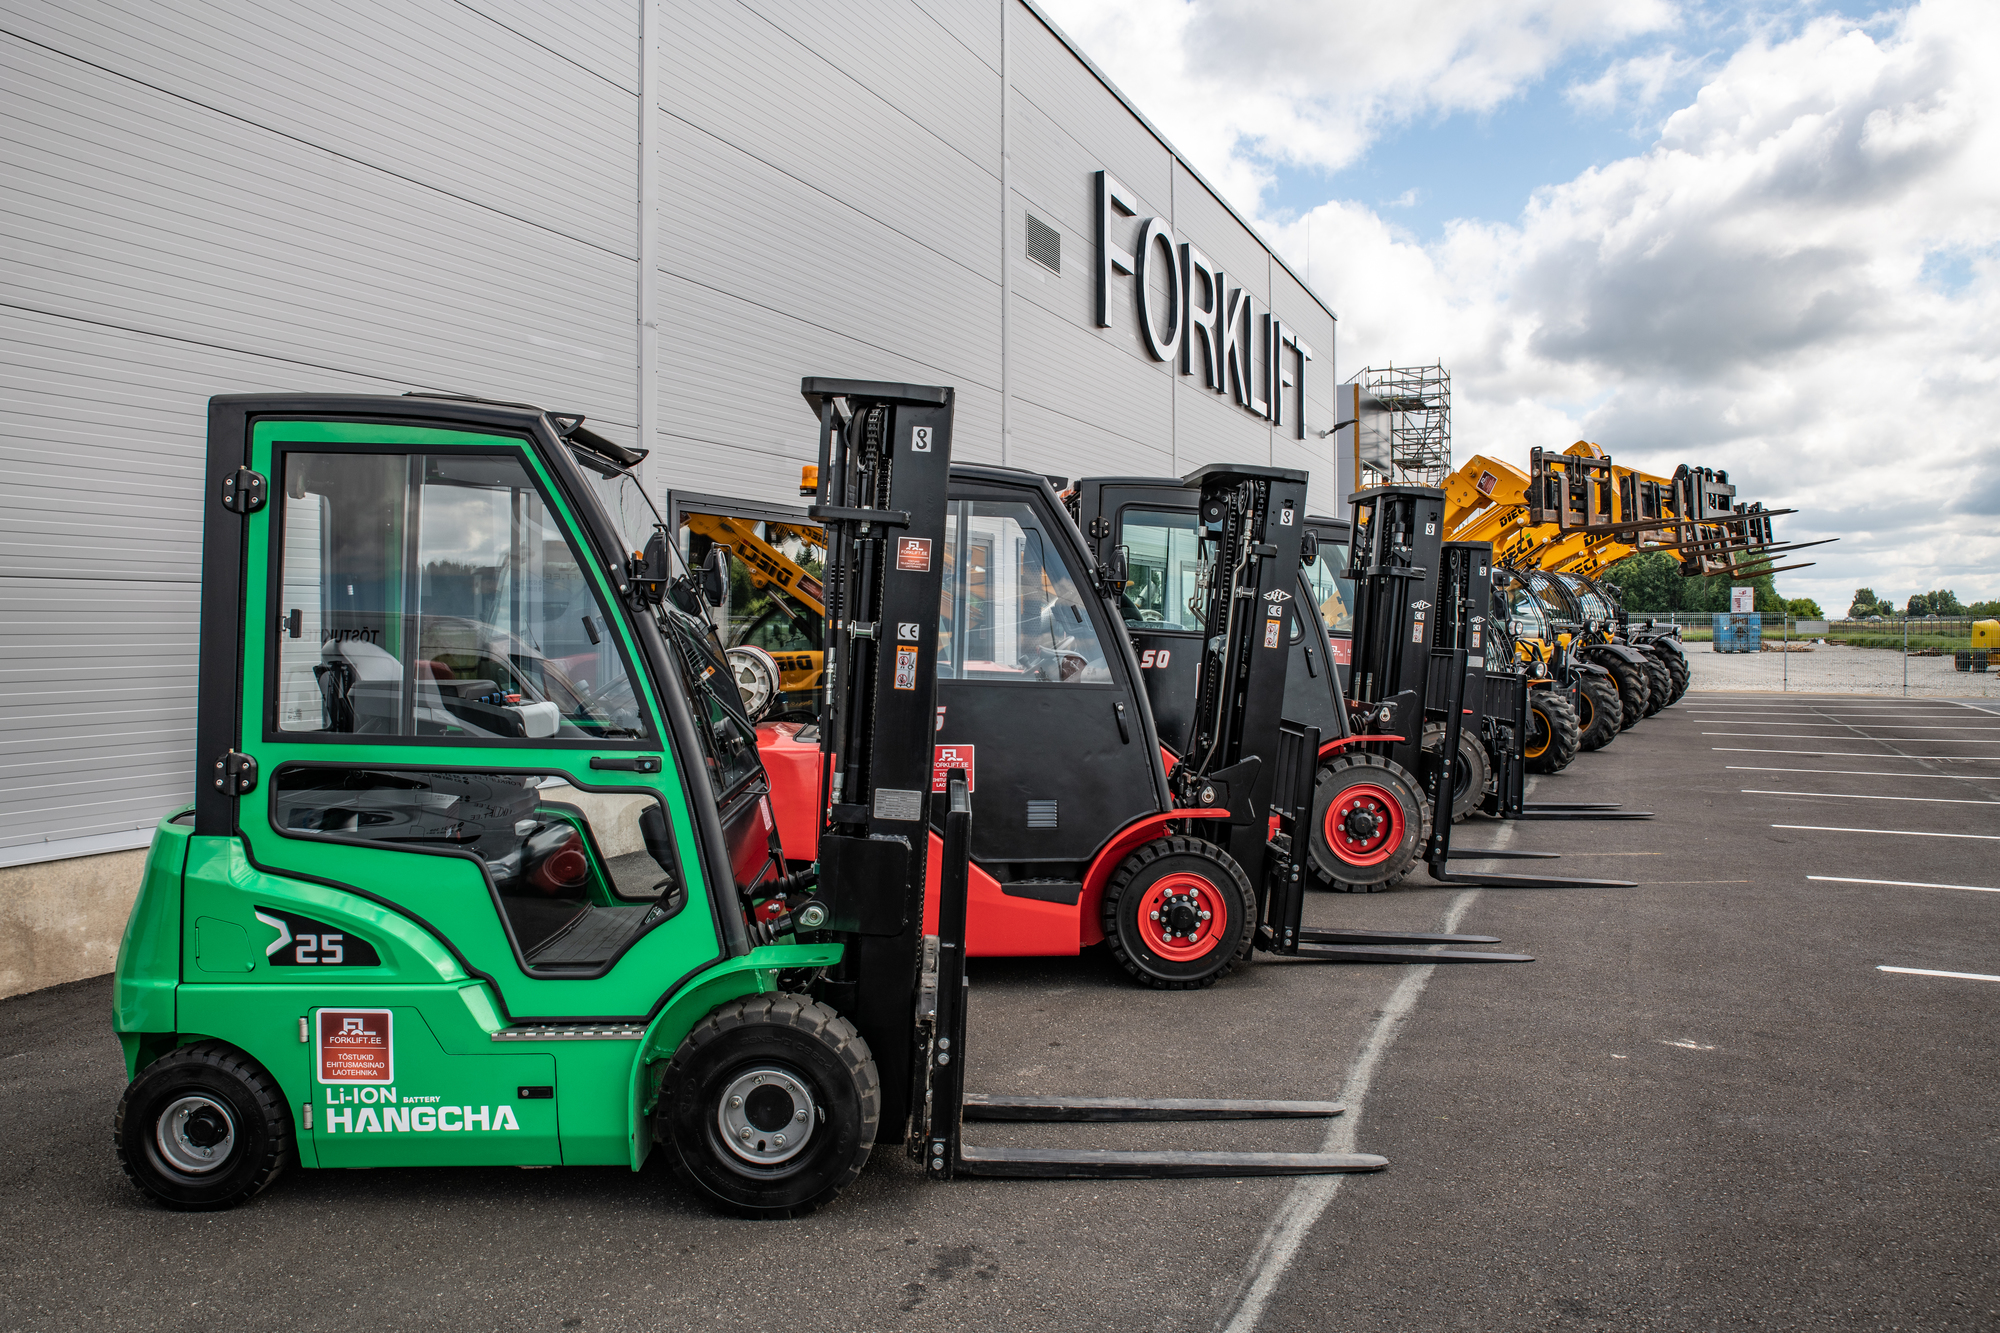 FORKLIFT OU undefined: photos 2